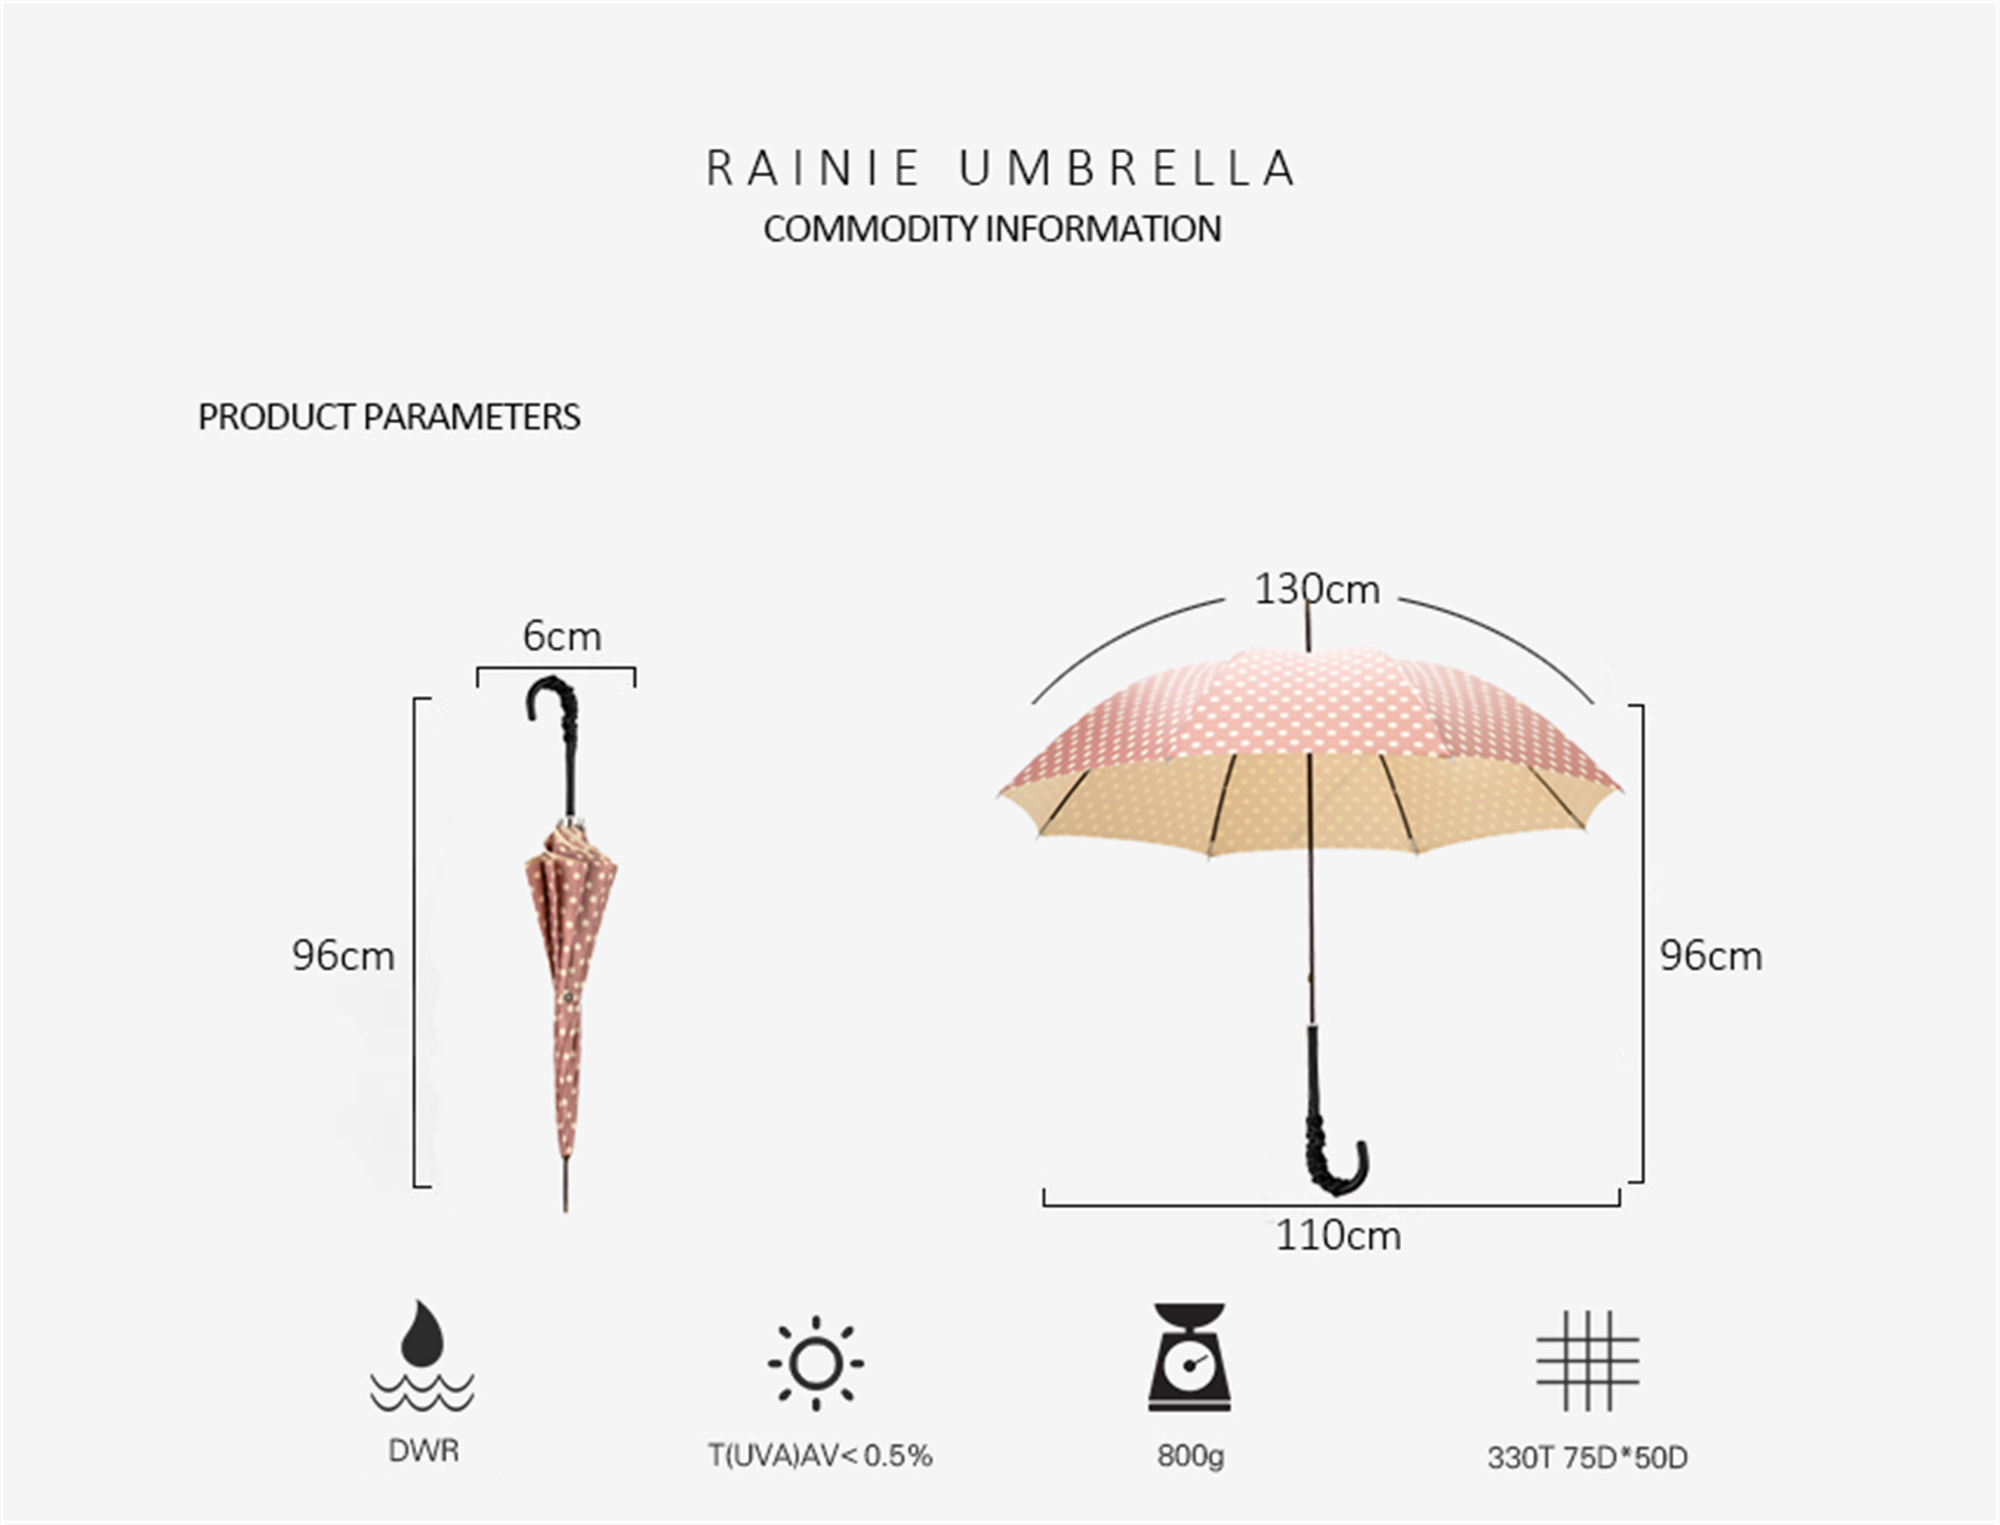 Leather curved umbrella with long handle